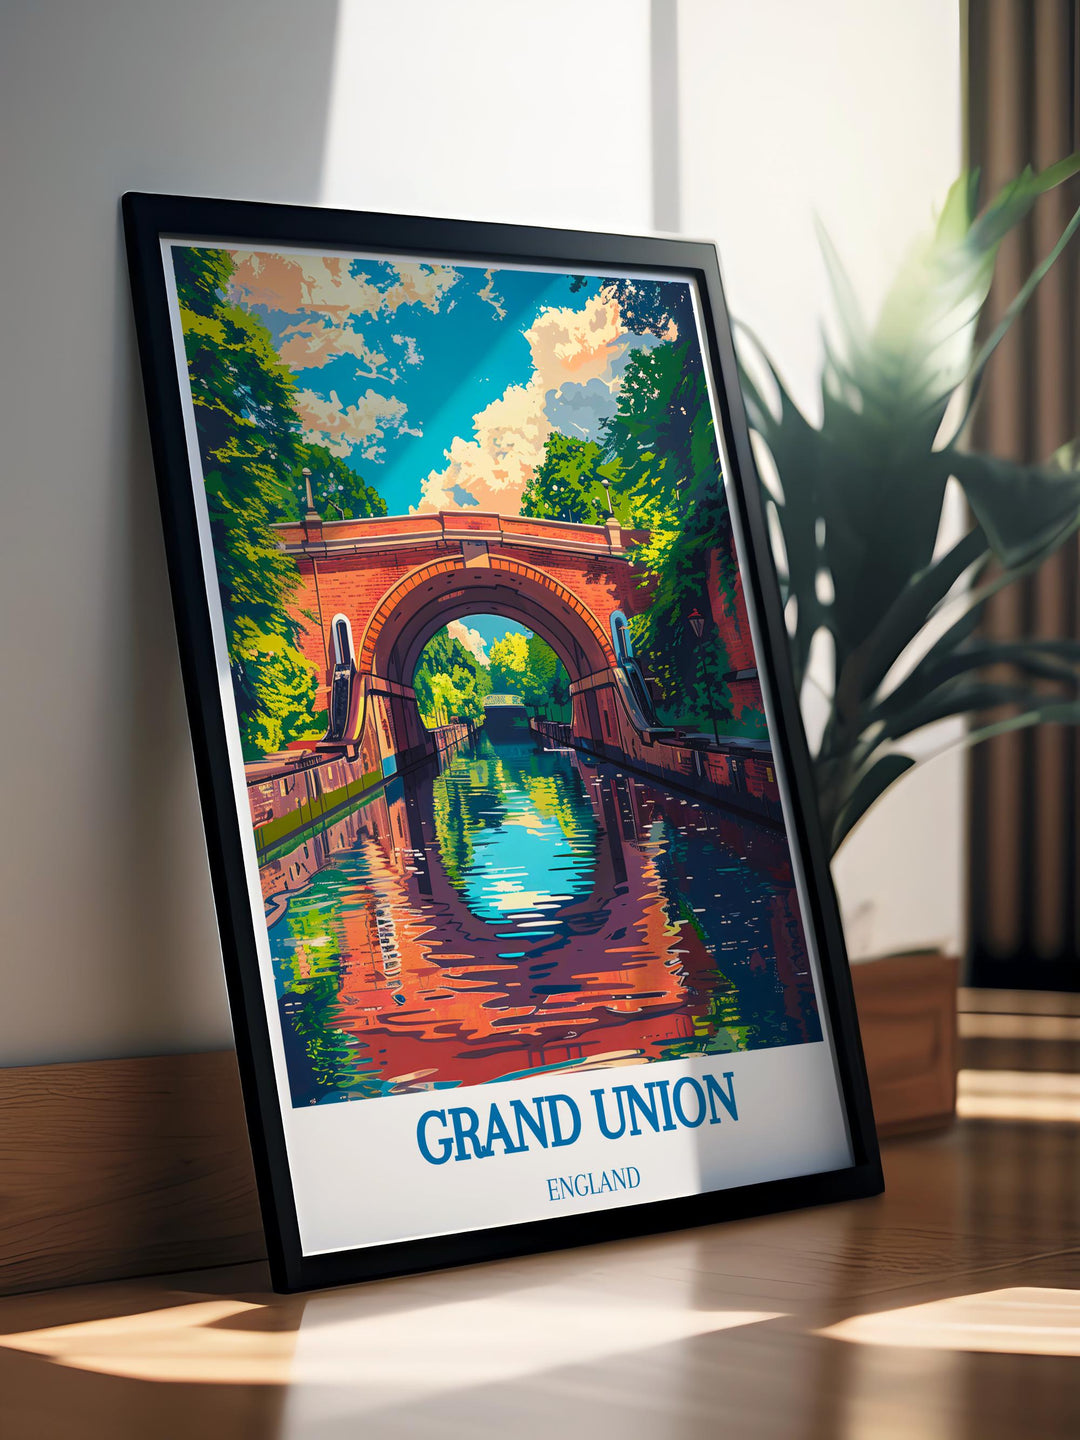 Bucket list prints of the Grand Union Canal, encouraging exploration and adventure in Englands famed outdoor settings.